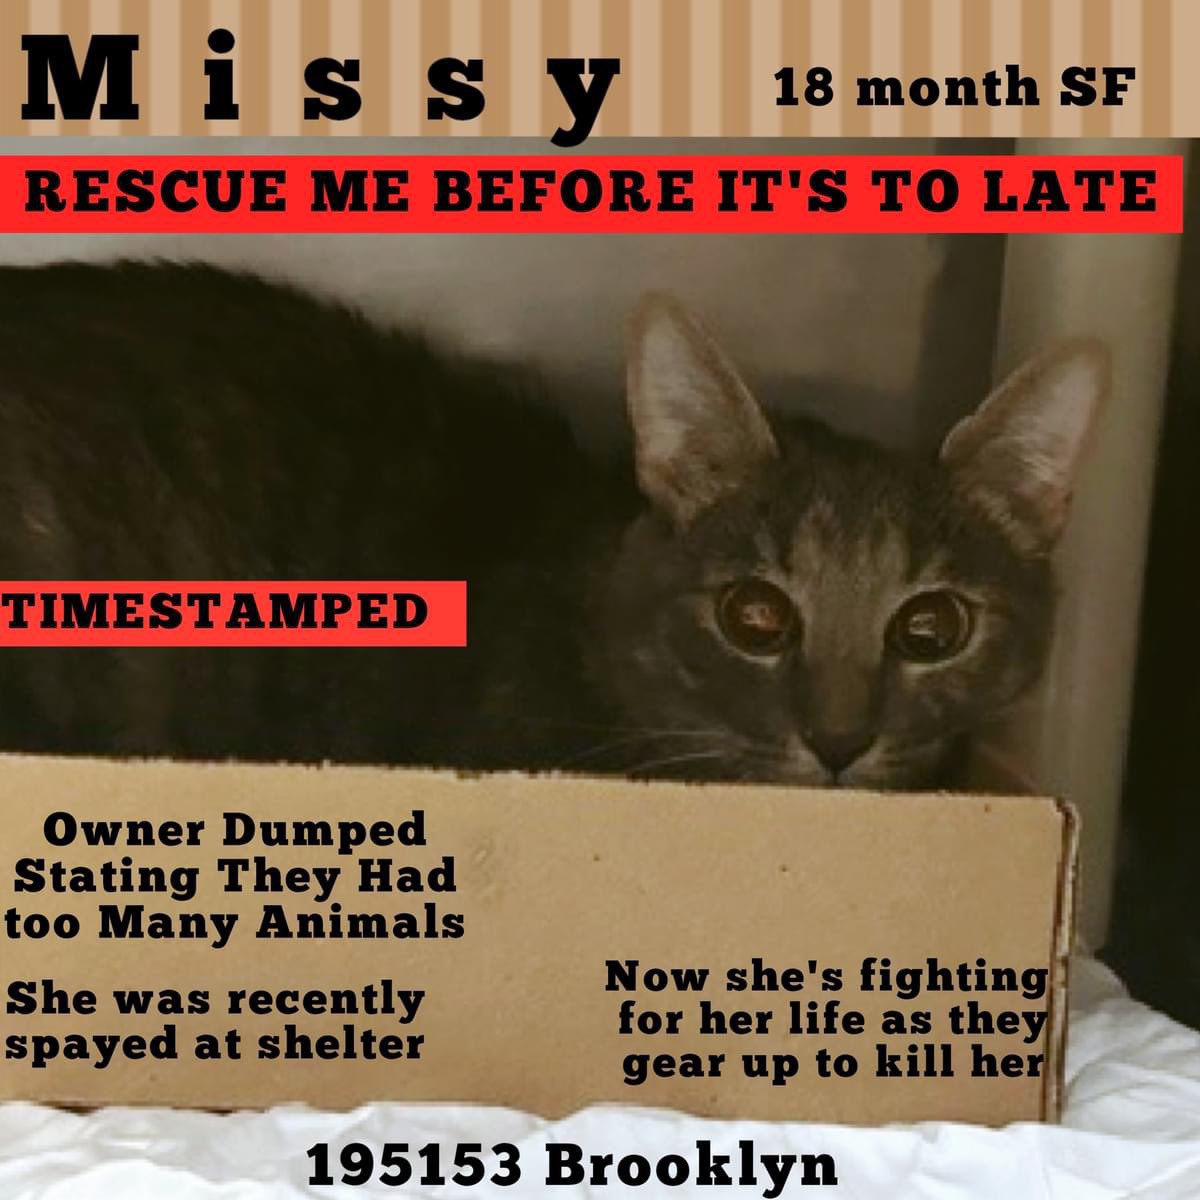 🆘Please RT-adopt-foster! 🆘 MISSY is on the “emergency placement” list at #ACCNYC and needs out of the shelter by 12 NOON 4/16! #URGENT #NYC #CATS #NYCACC #TeamKittySOS #AdoptDontShop #CatsOfTwitter newhope.shelterbuddy.com/Animal/Profile…